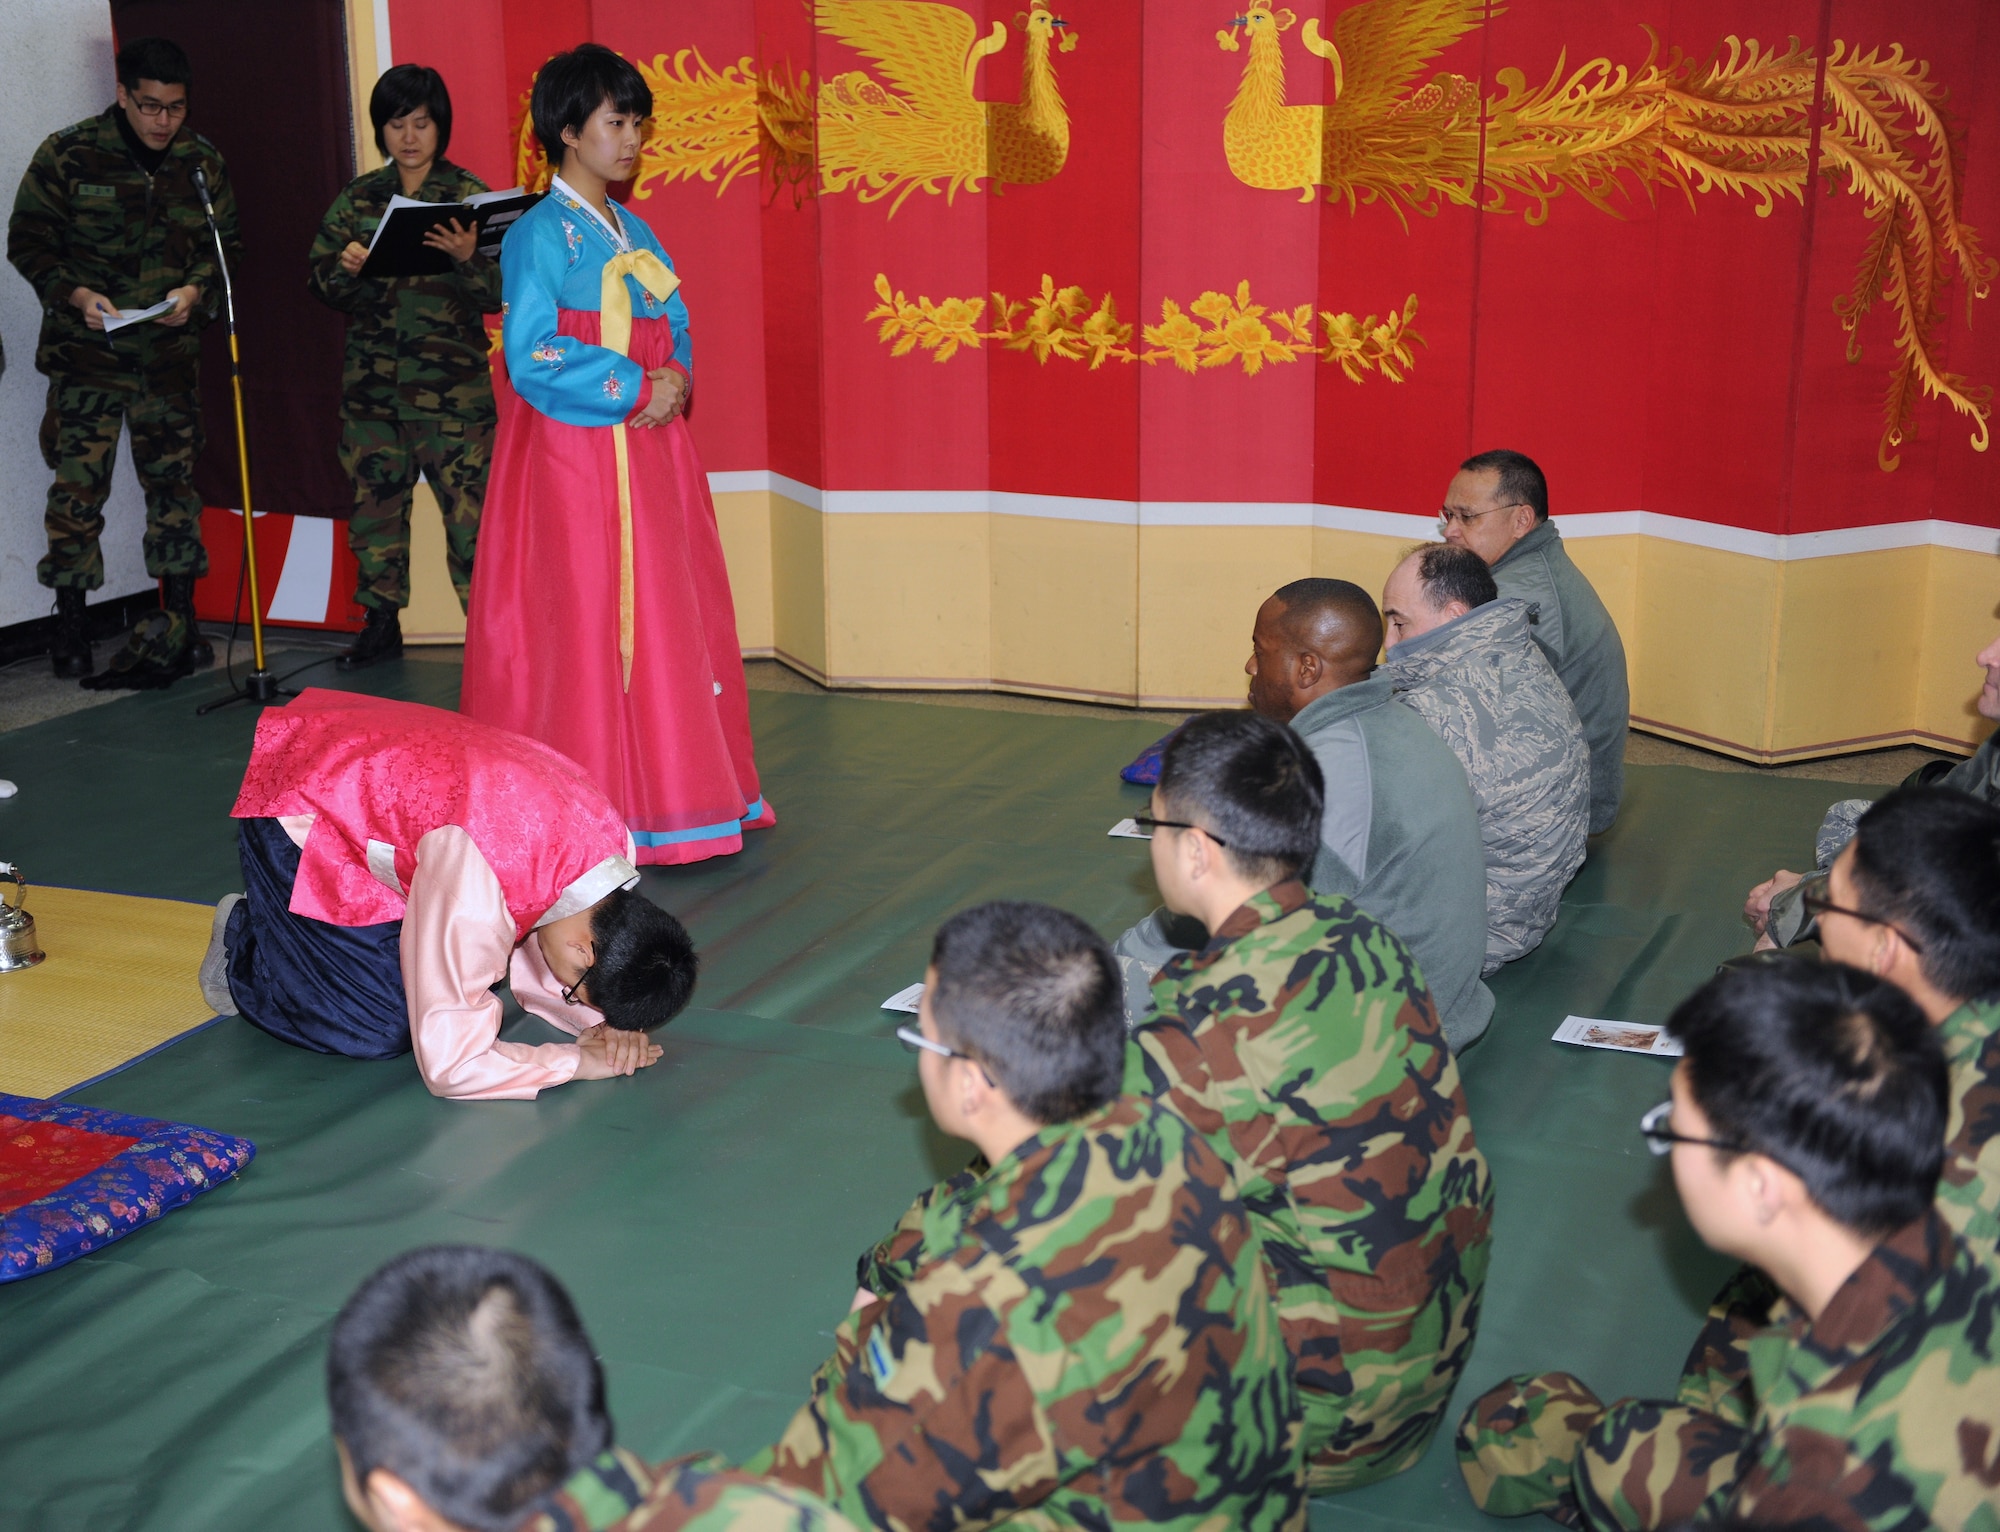 KUNSAN AIR BASE, Republic of Korea -- Two Republic of Korea Air Force 38th Fighter Group members demonstrate how to bow during a Lunar New Year ceremony in the ROKAF base exchange Feb. 3. The combined 8th Fighter Wing and ROKAF 38th FG ceremony included a memorial service, ceremonial bowing, a traditional Korean breakfast and traditional games. (U.S. Air Force photo/Senior Airman Ciara Wymbs)